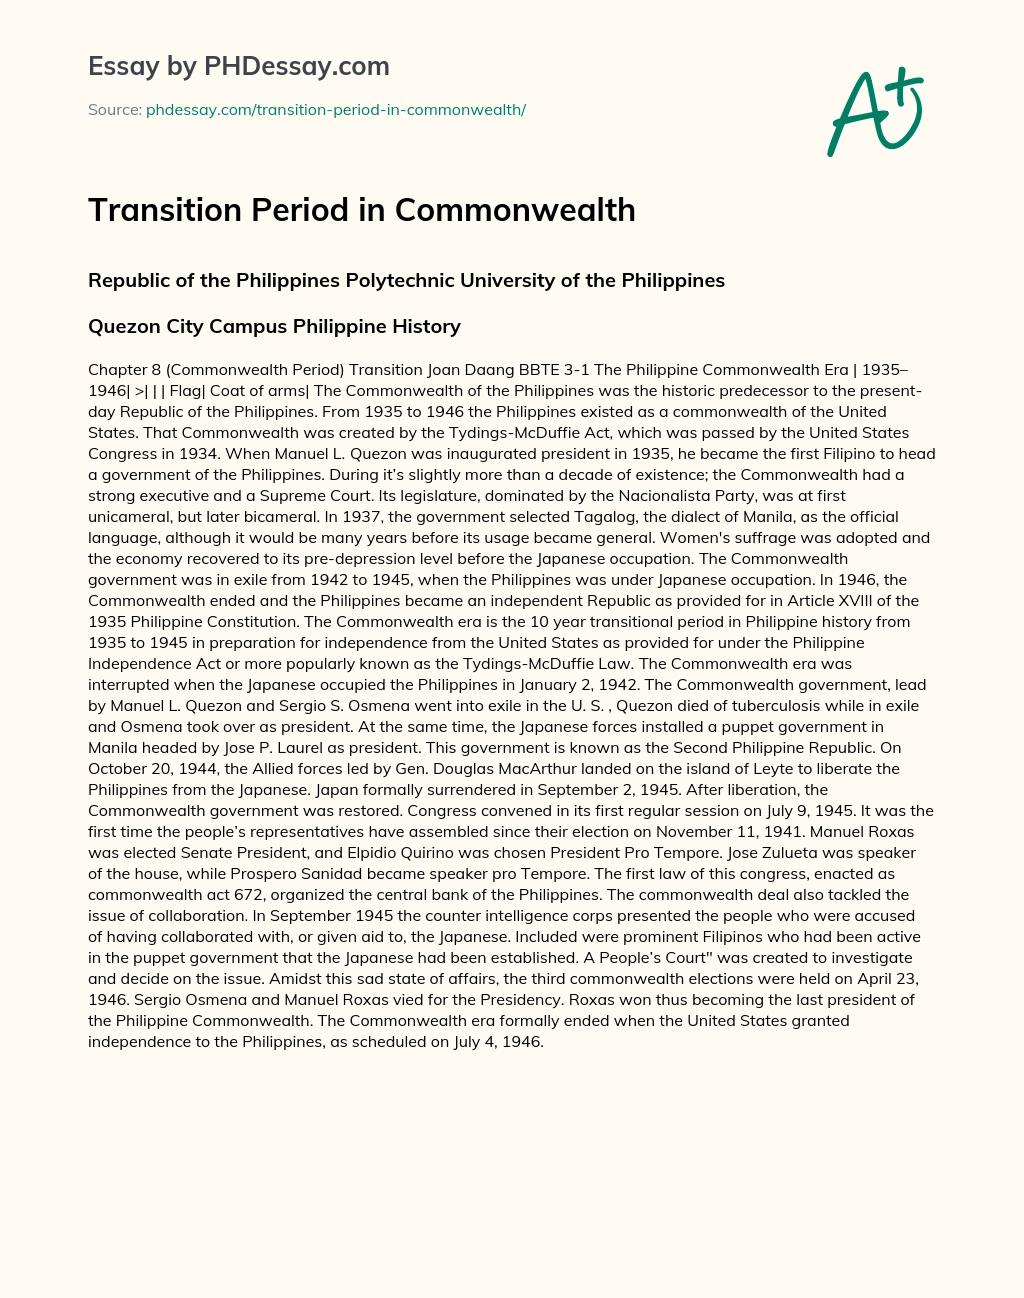 Transition Period in Commonwealth essay